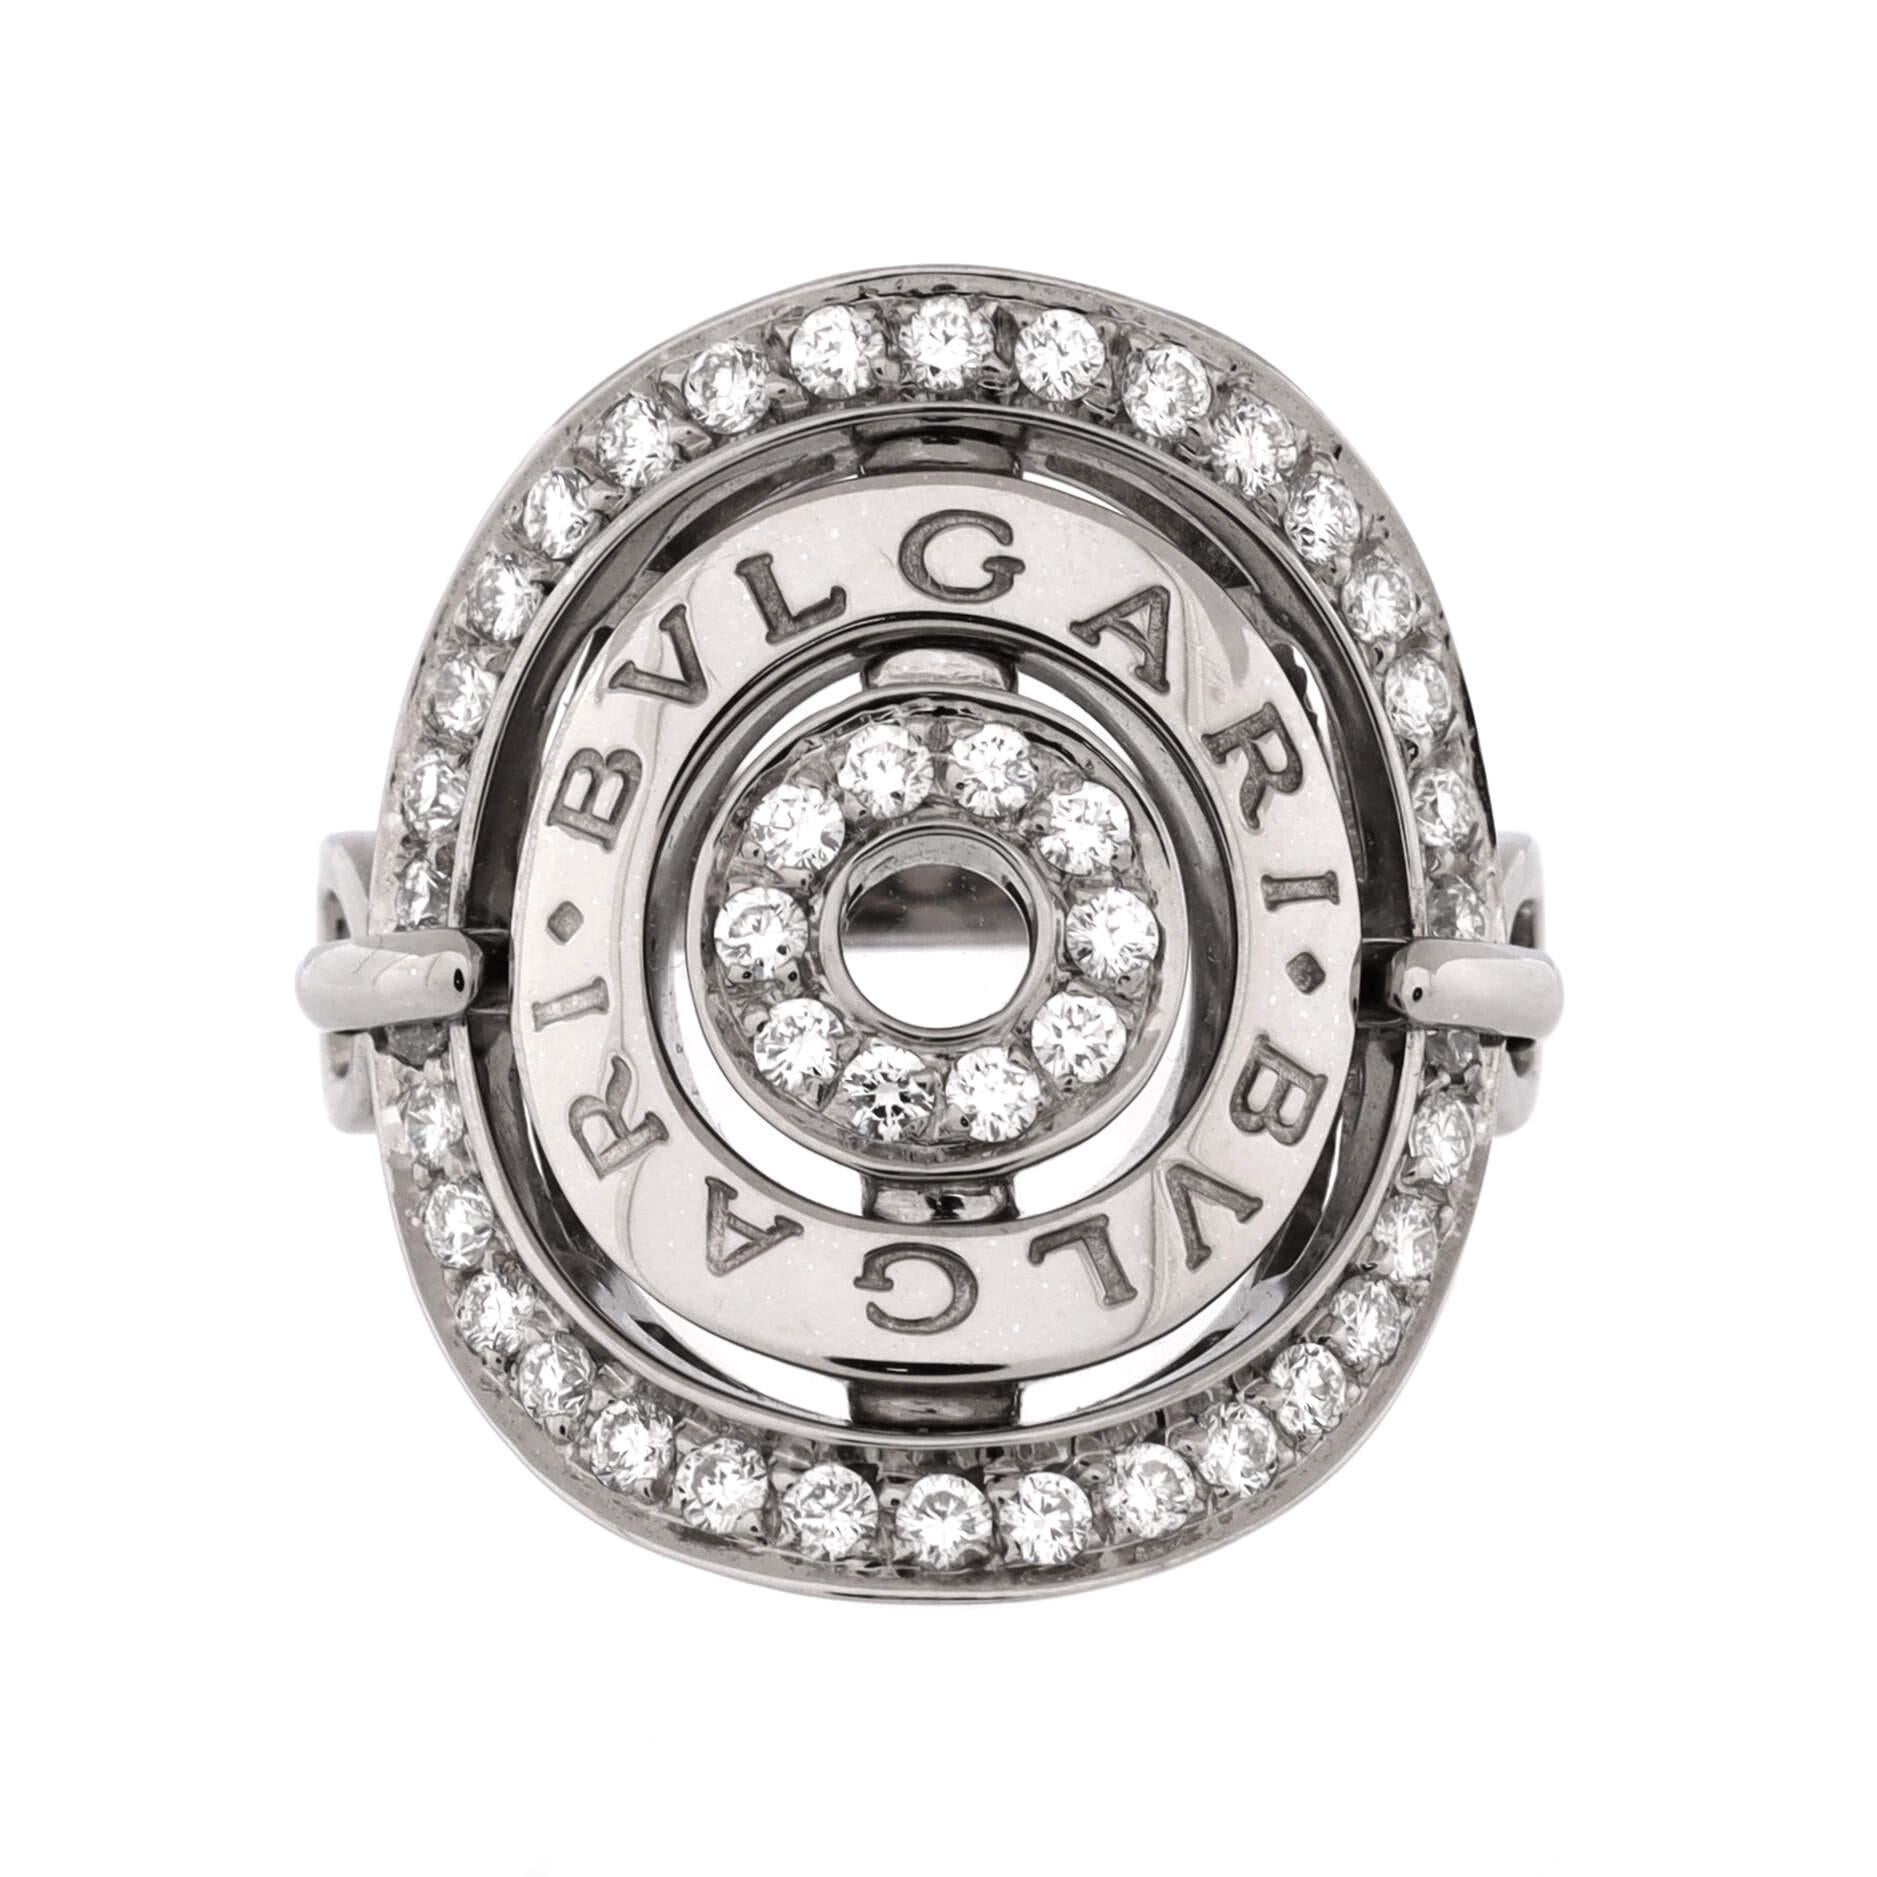 Condition: Great. Minor wear throughout.
Accessories: No Accessories
Measurements: Size: 6, Width: 3.00 mm
Designer: Bvlgari
Model: Astrale Cerchi Shield Ring 18K White Gold with Diamonds
Exterior Color: White Gold
Item Number: 206772/36